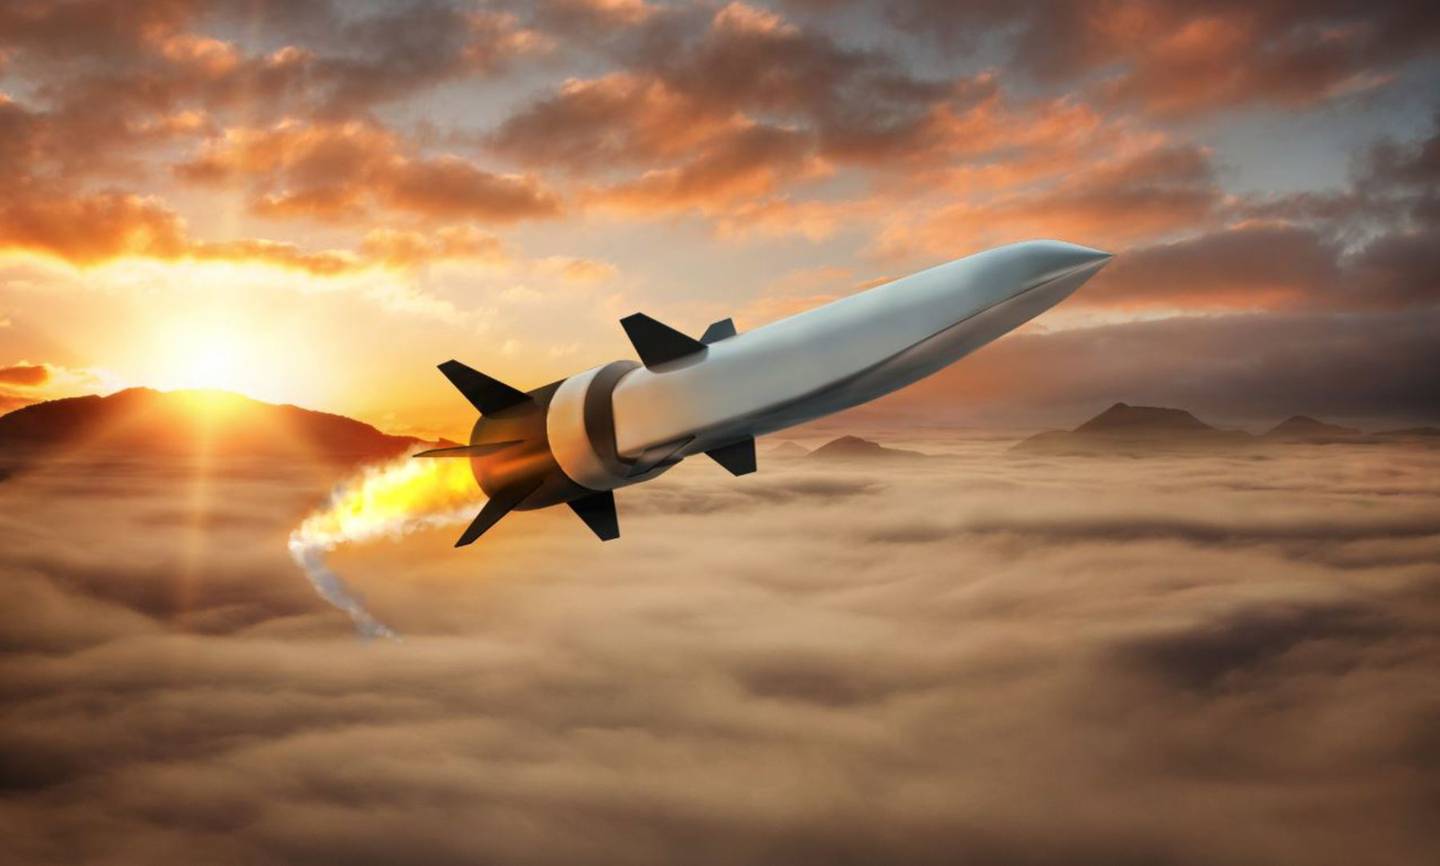 Artist’s concept of Hypersonic Air-breathing Weapons Concept (HAWC) missile.